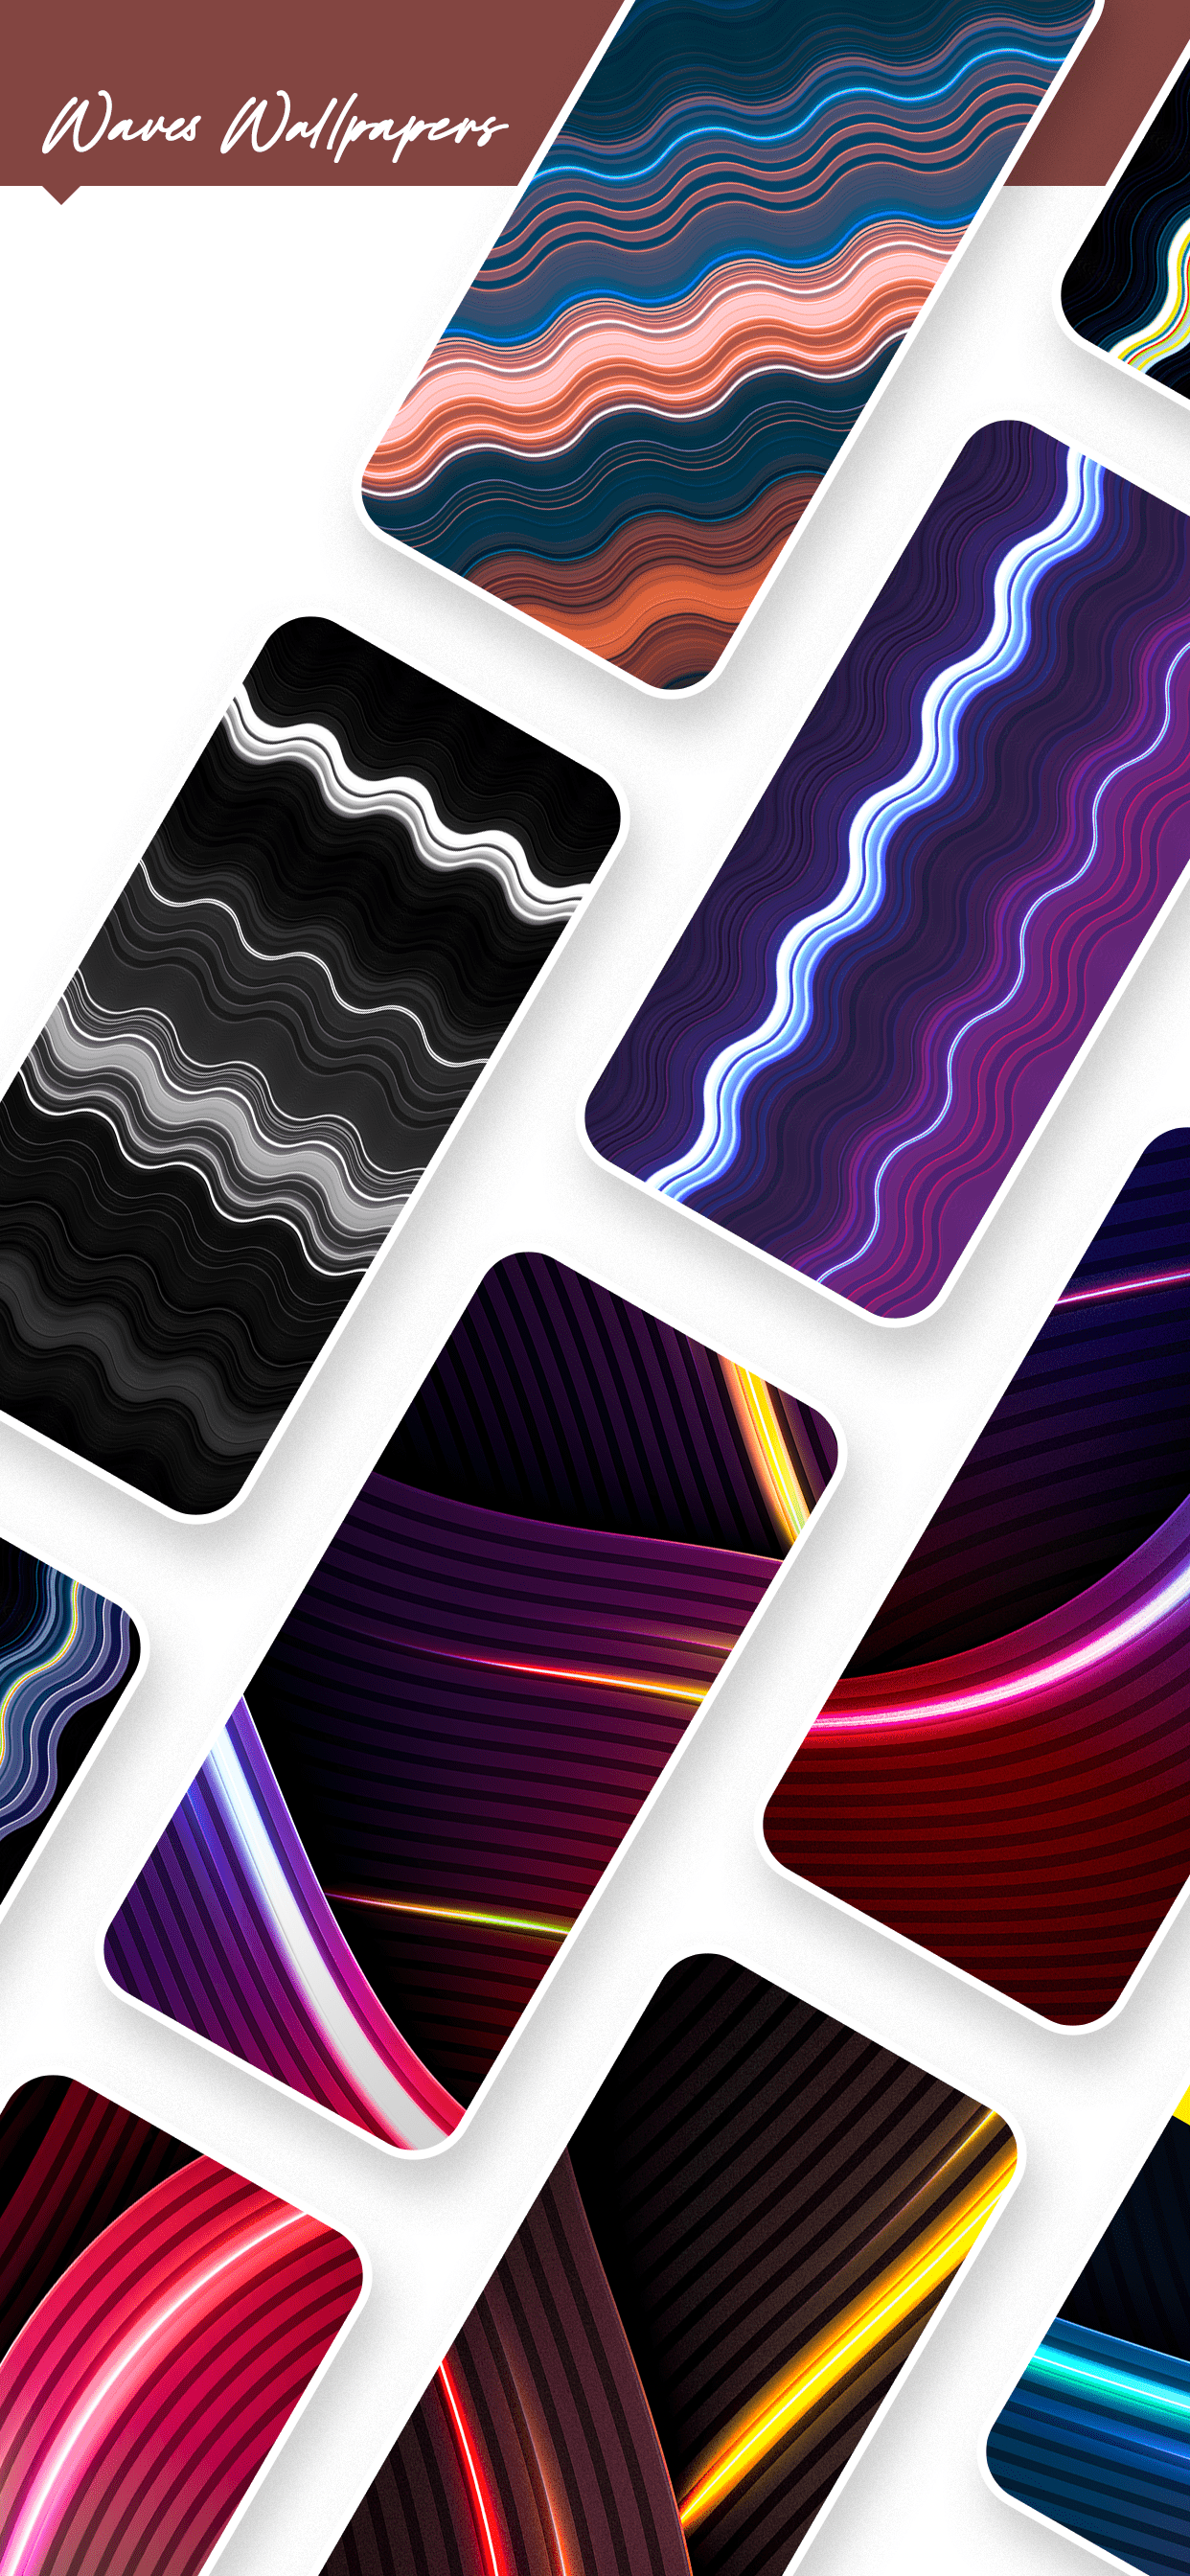 Waves-Wallpapers-6.png